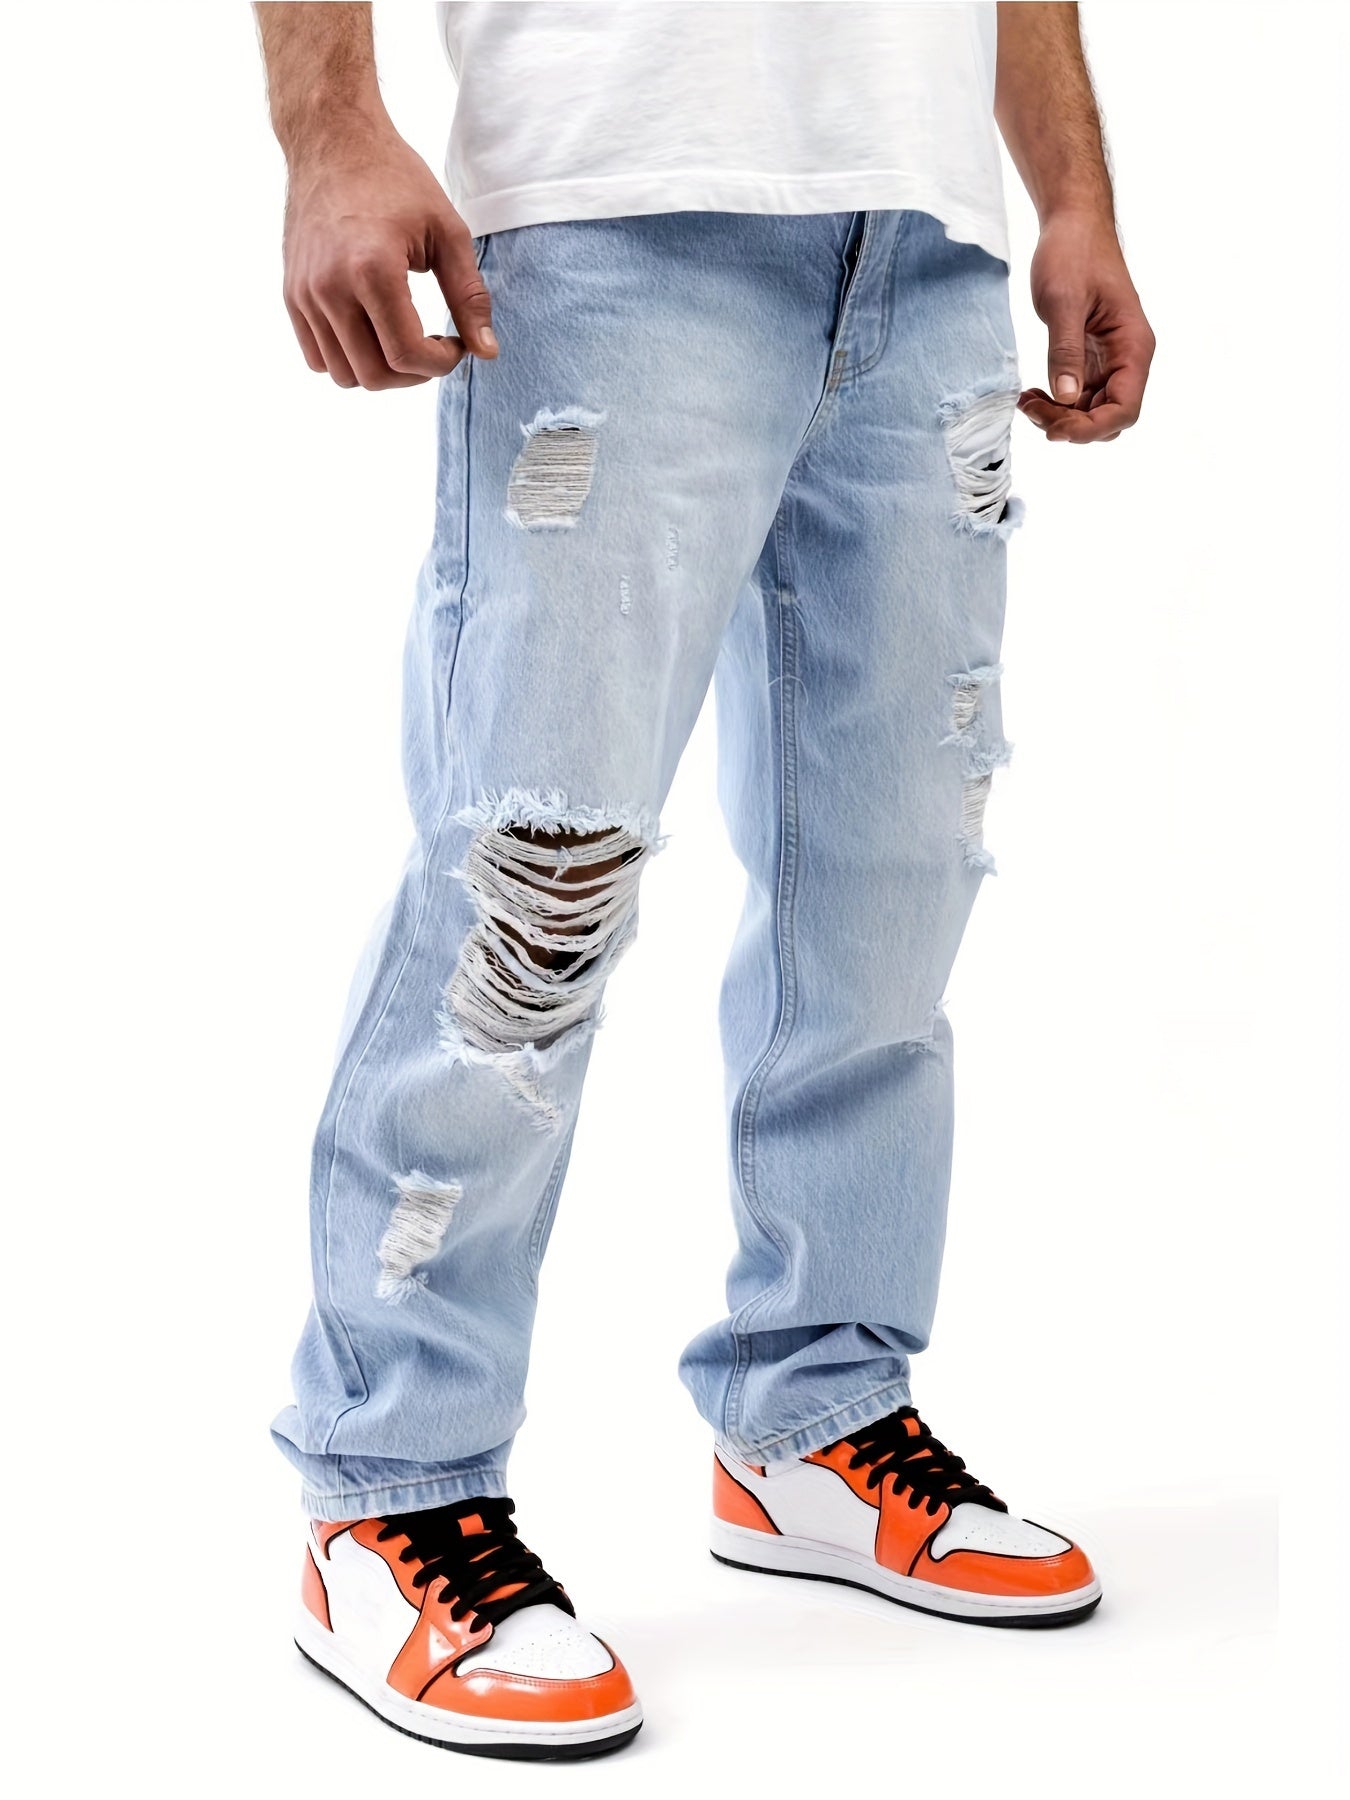 Wide Leg Cotton Blend Ripped  Jeans, Men's Casual Street Style Loose Fit Light Blue Denim Pants For Spring Summer